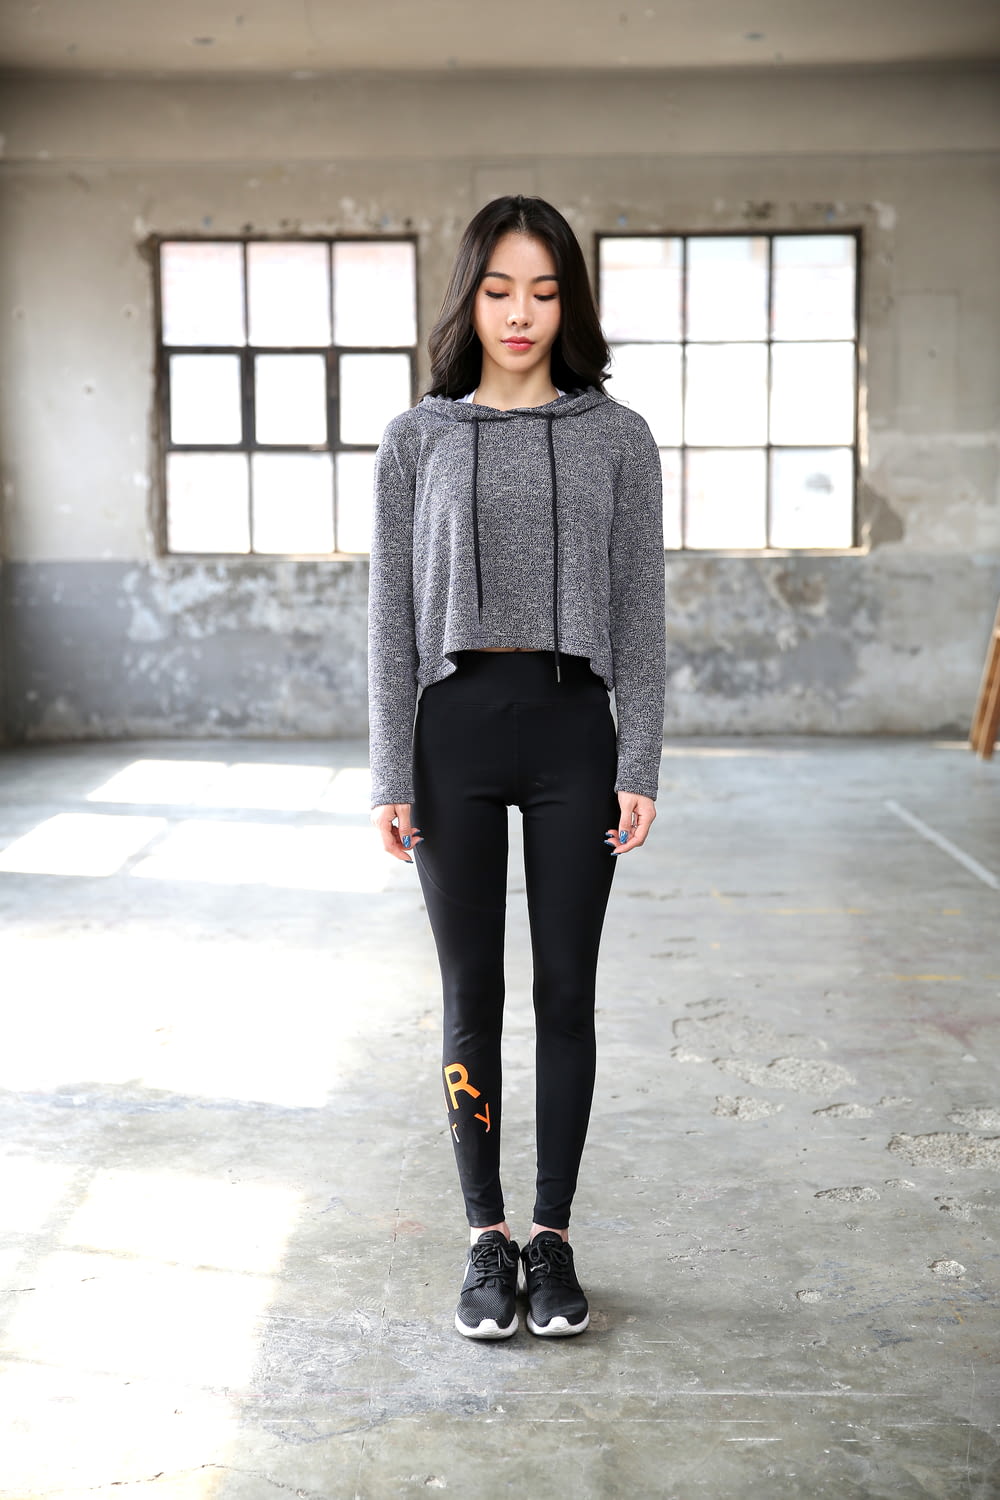 woman in gray sweater and black pants standing on gray concrete floor